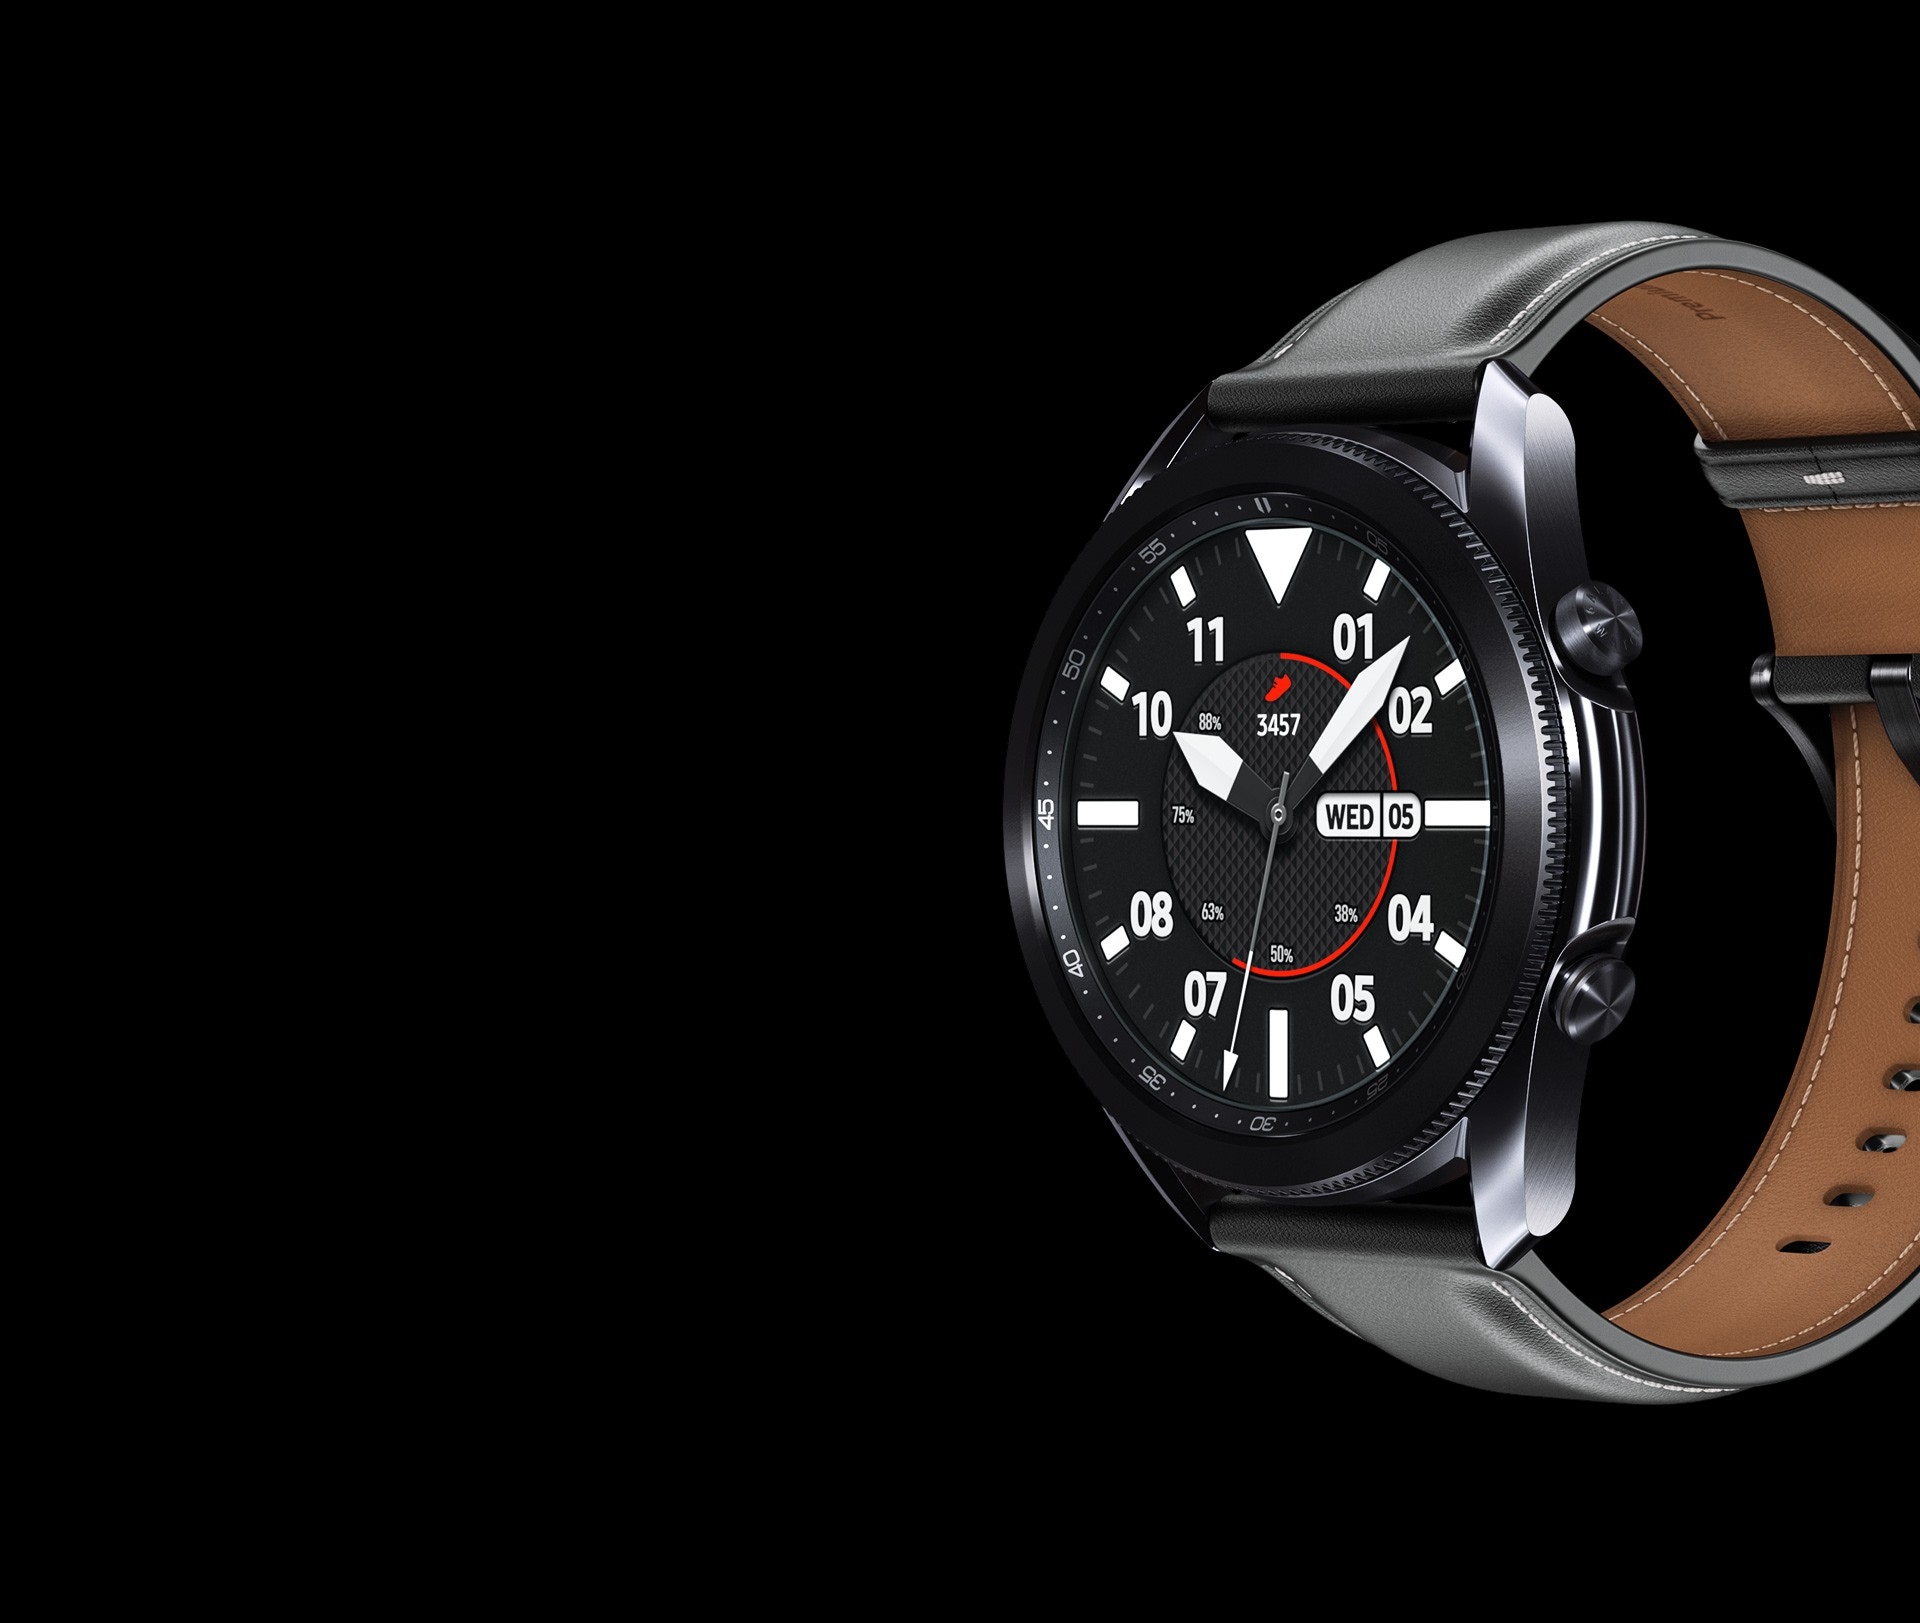 45mm Galaxy Watch3 in Mystic Black with a Sporty Classic Watch Face seen from an angle